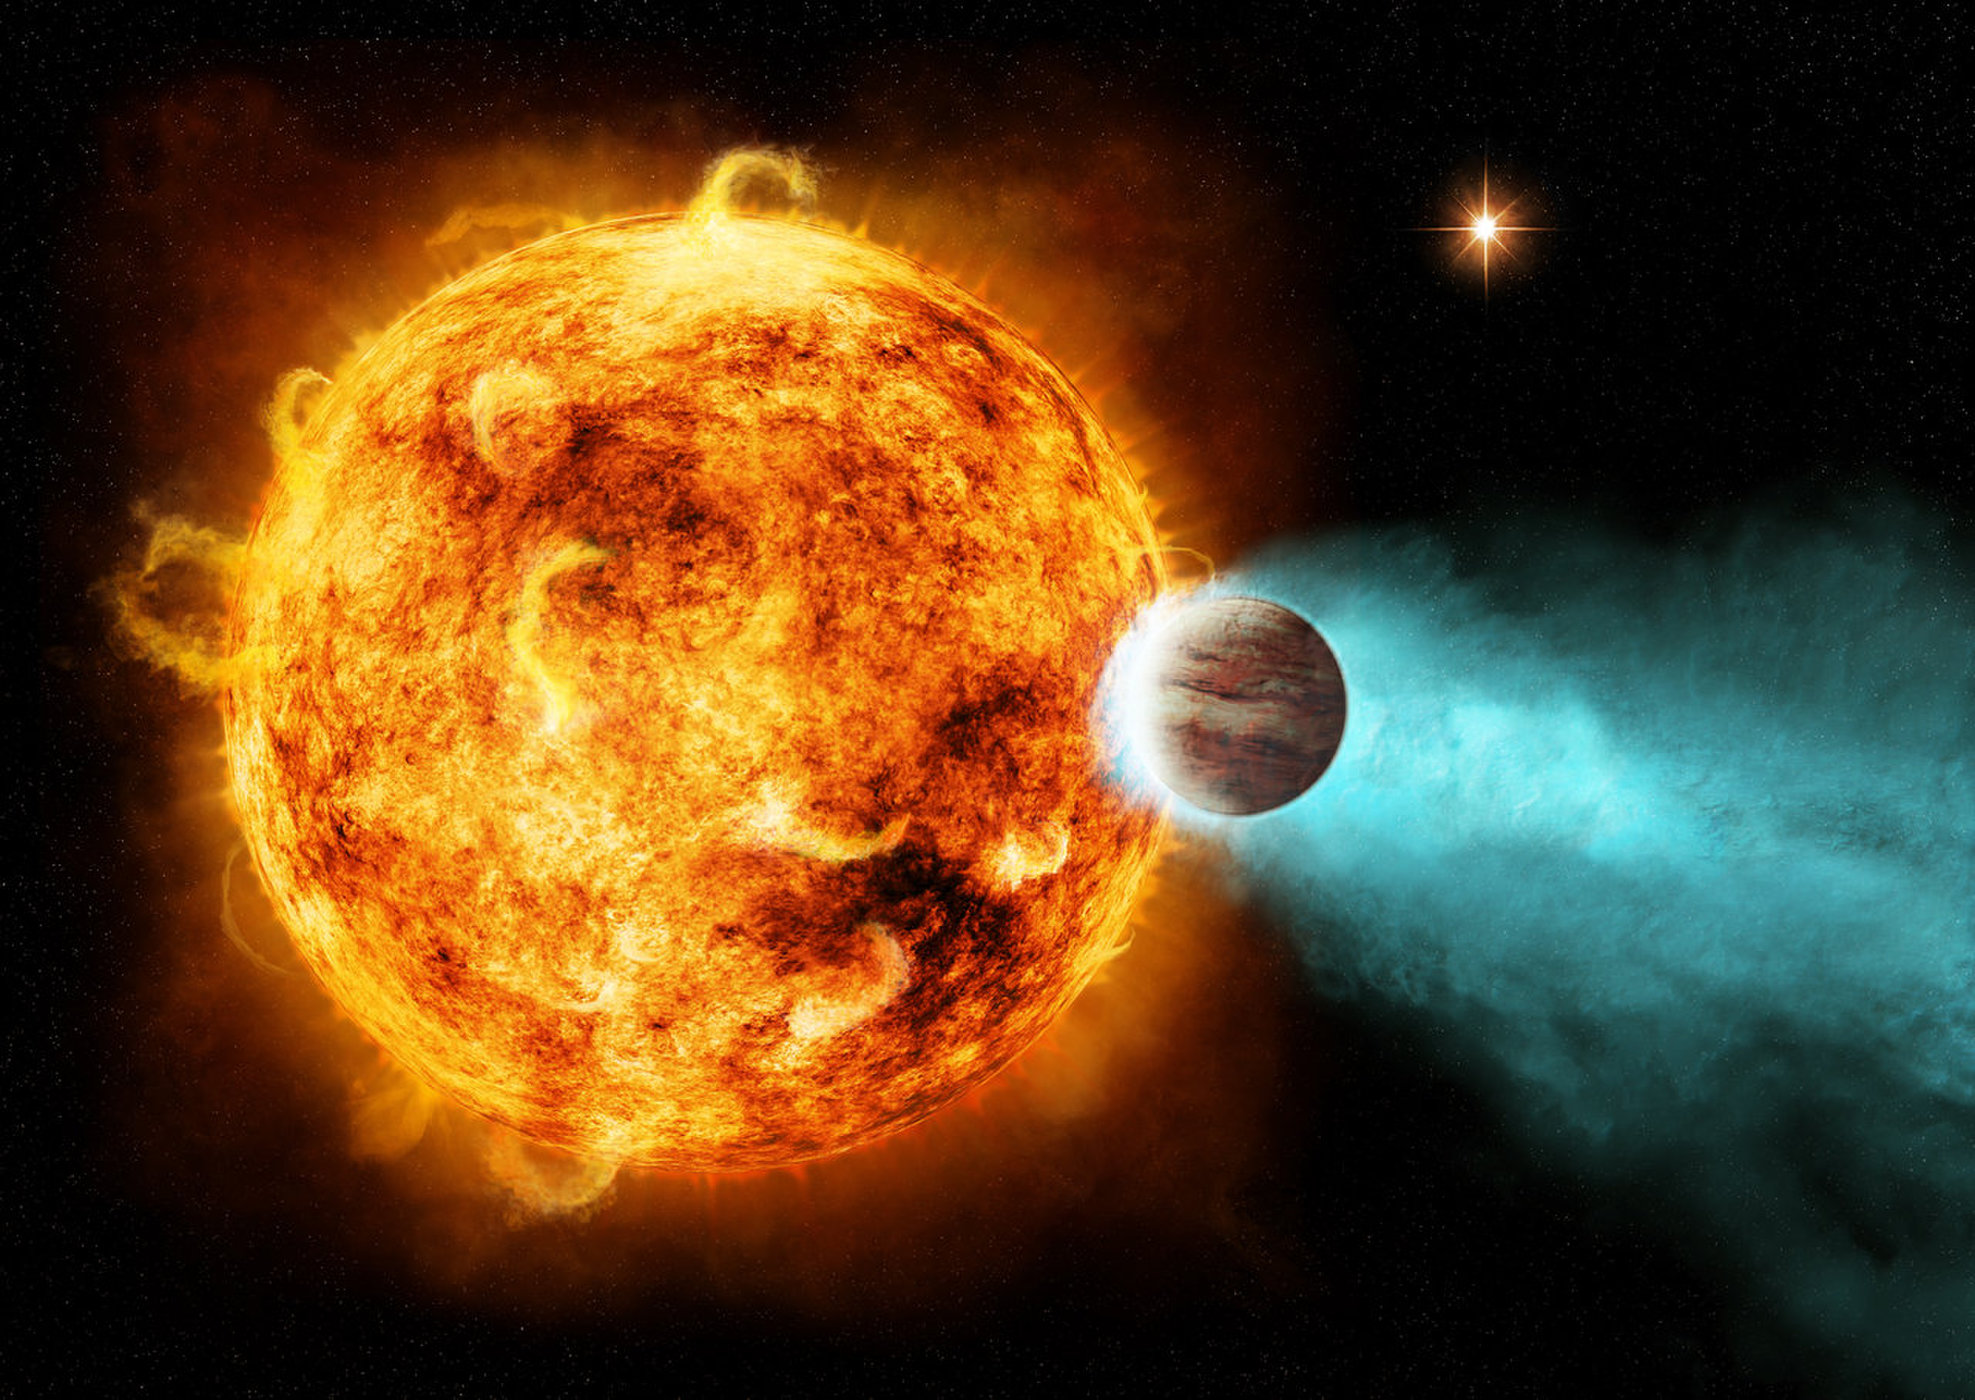 An Occam's Razor for Very-Hot Hot Jupiters